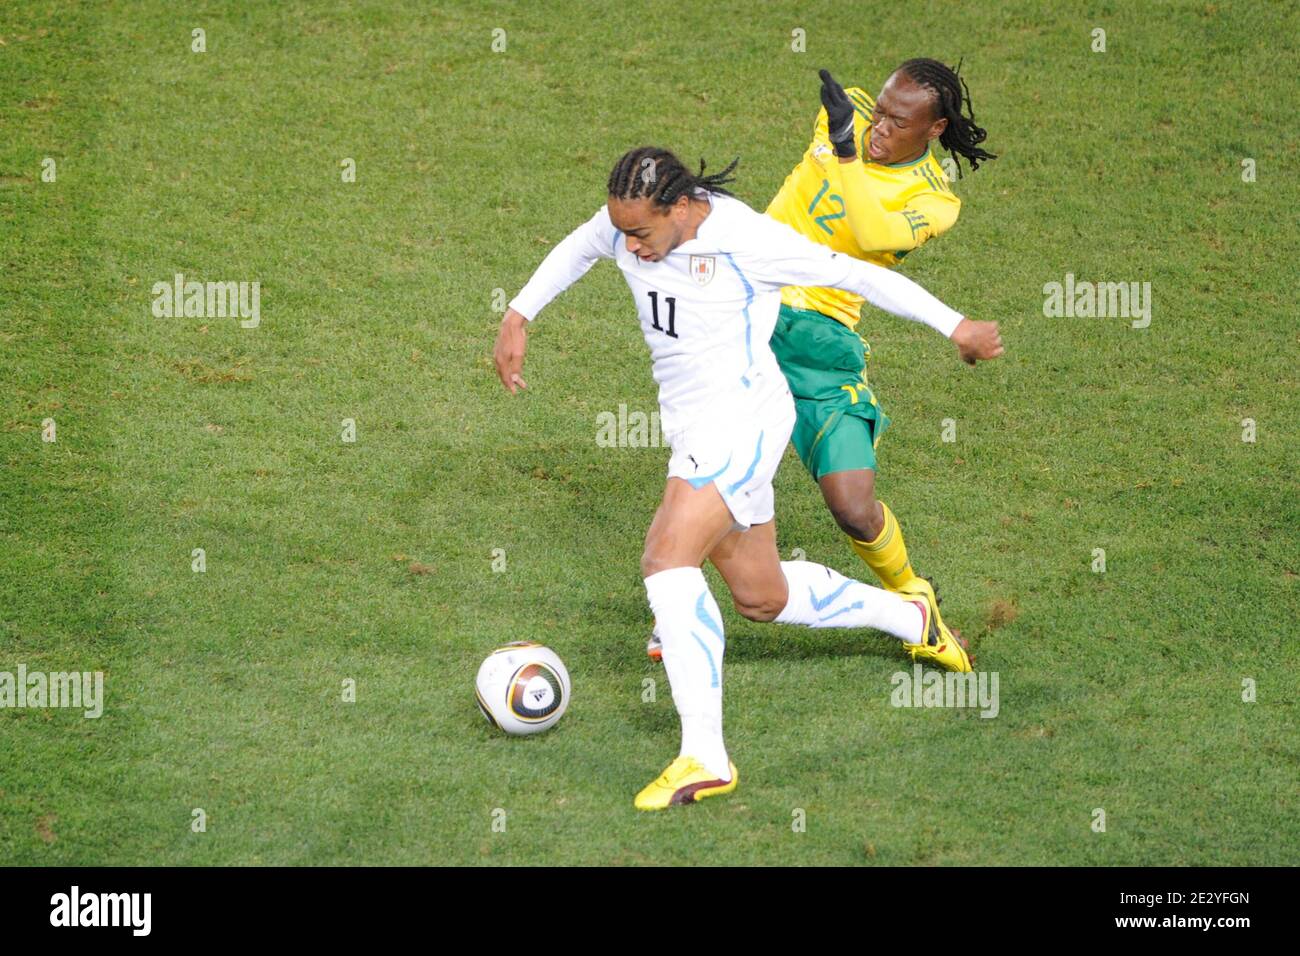 Uruguay's Alvaro Pereira battles for the ball with South Africa's Reneilwe Letsholonyane during the 2010 FIFA World Cup South Africa Soccer match, group A, South Africa vs Uruguay at Loftus Versfeld football stadium in Pretoria, South Africa on June 16, 2010. Uruguay won 3-0. Photo by Henri Szwarc/ABACAPRESS.COM Stock Photo